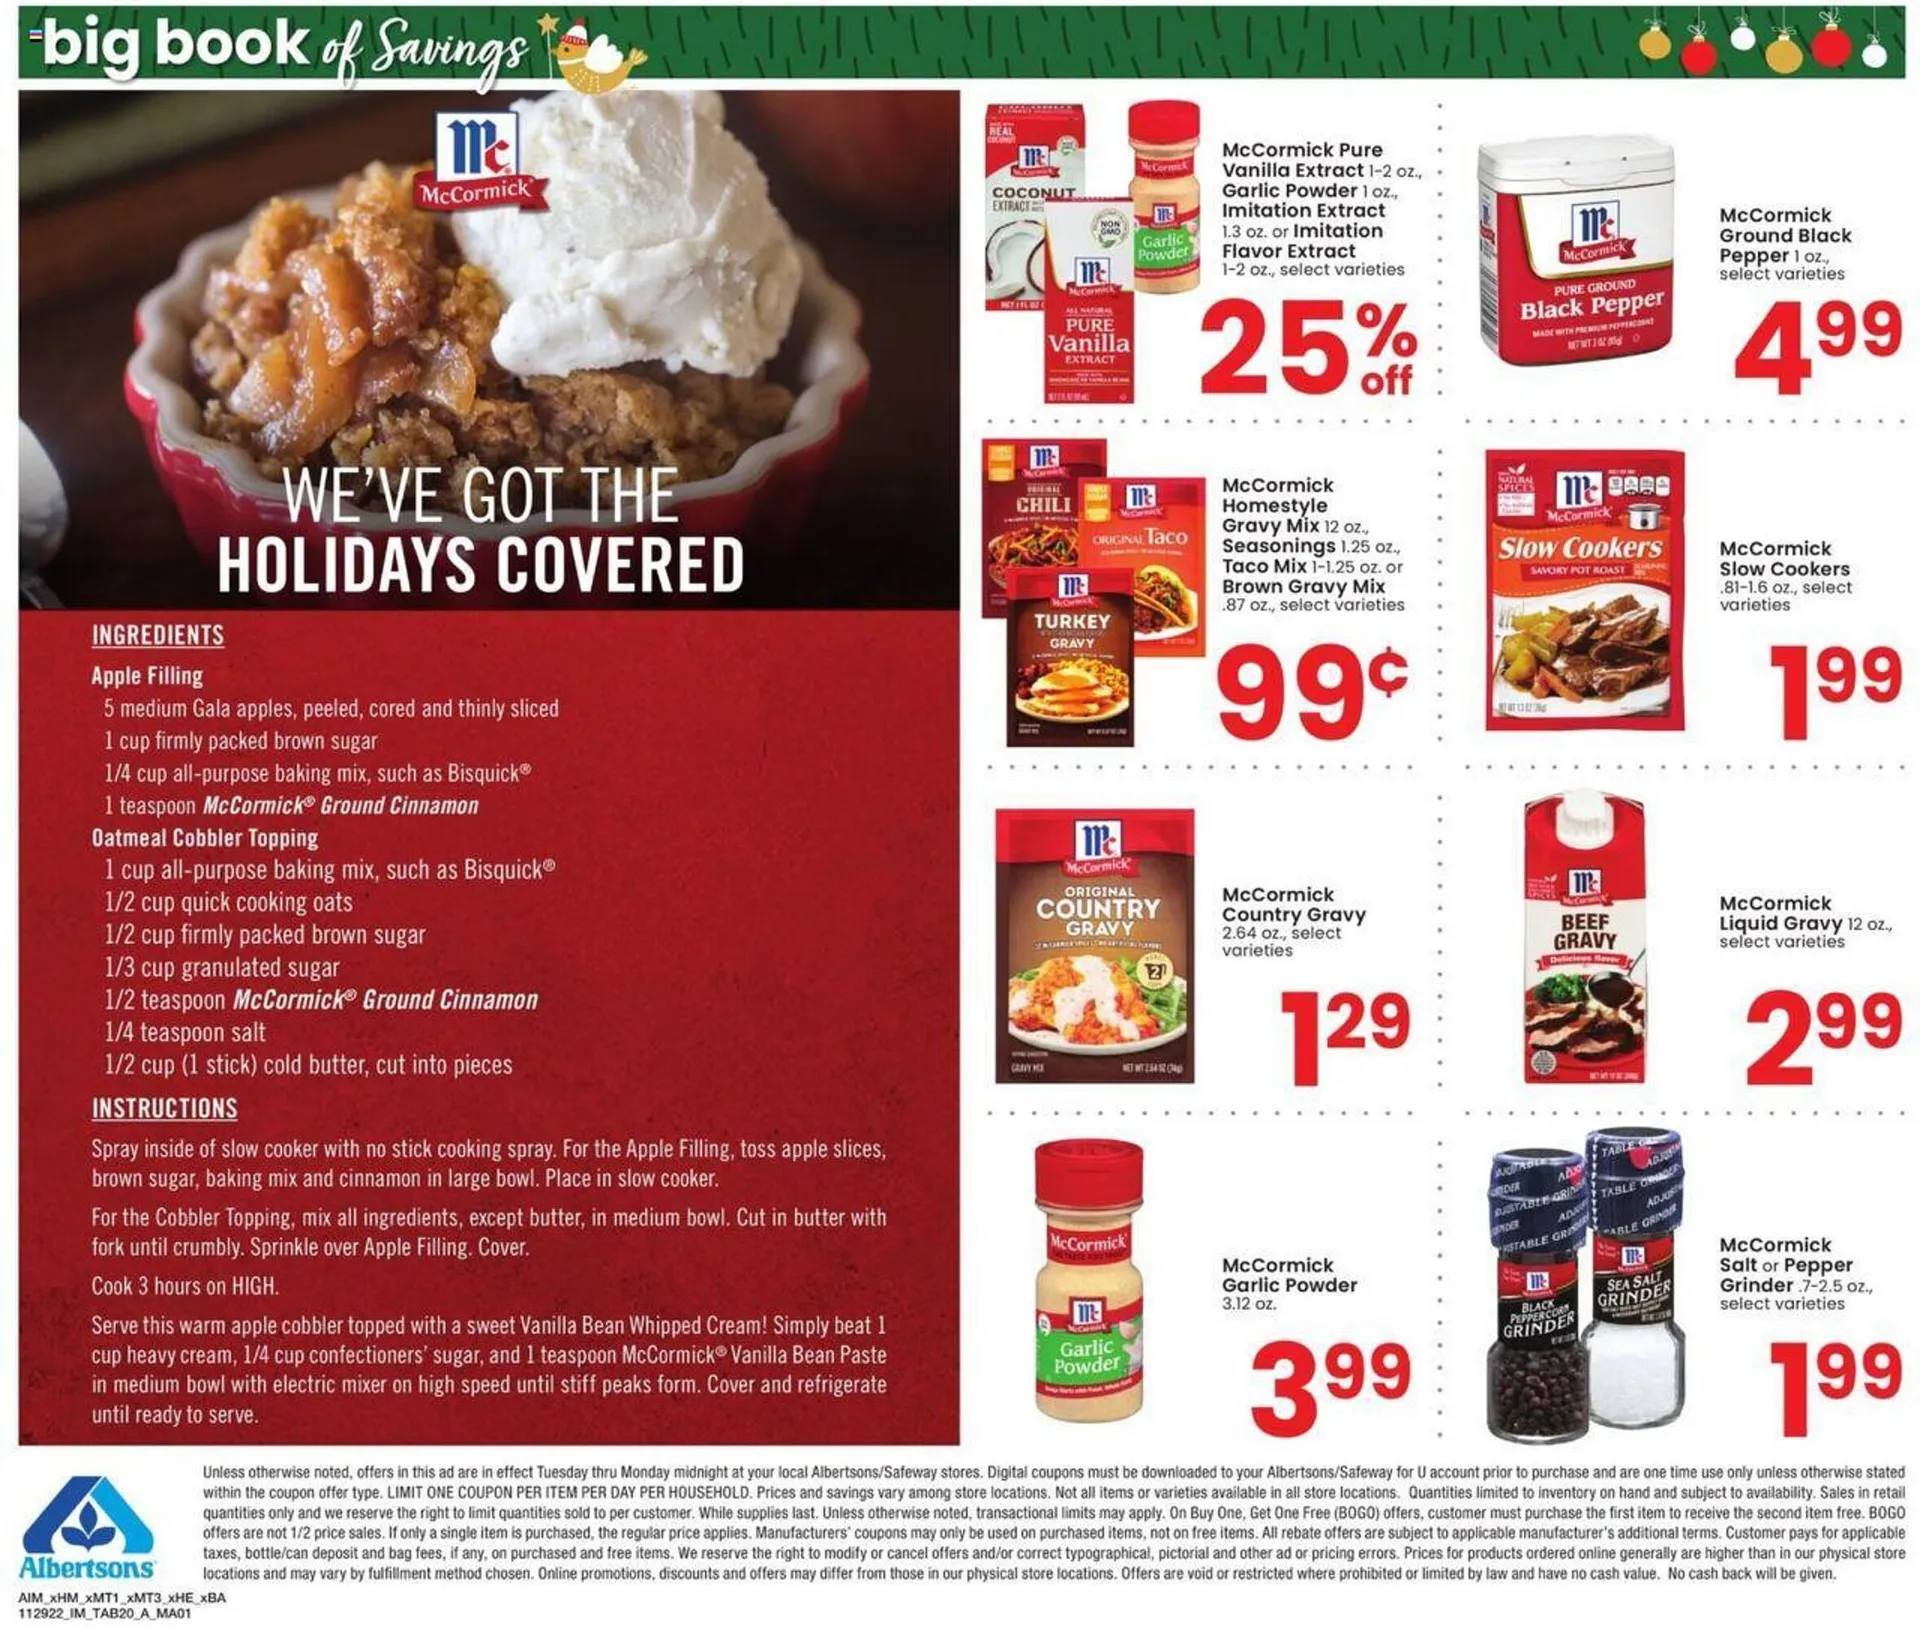 Albertsons Weekly Ad - 20